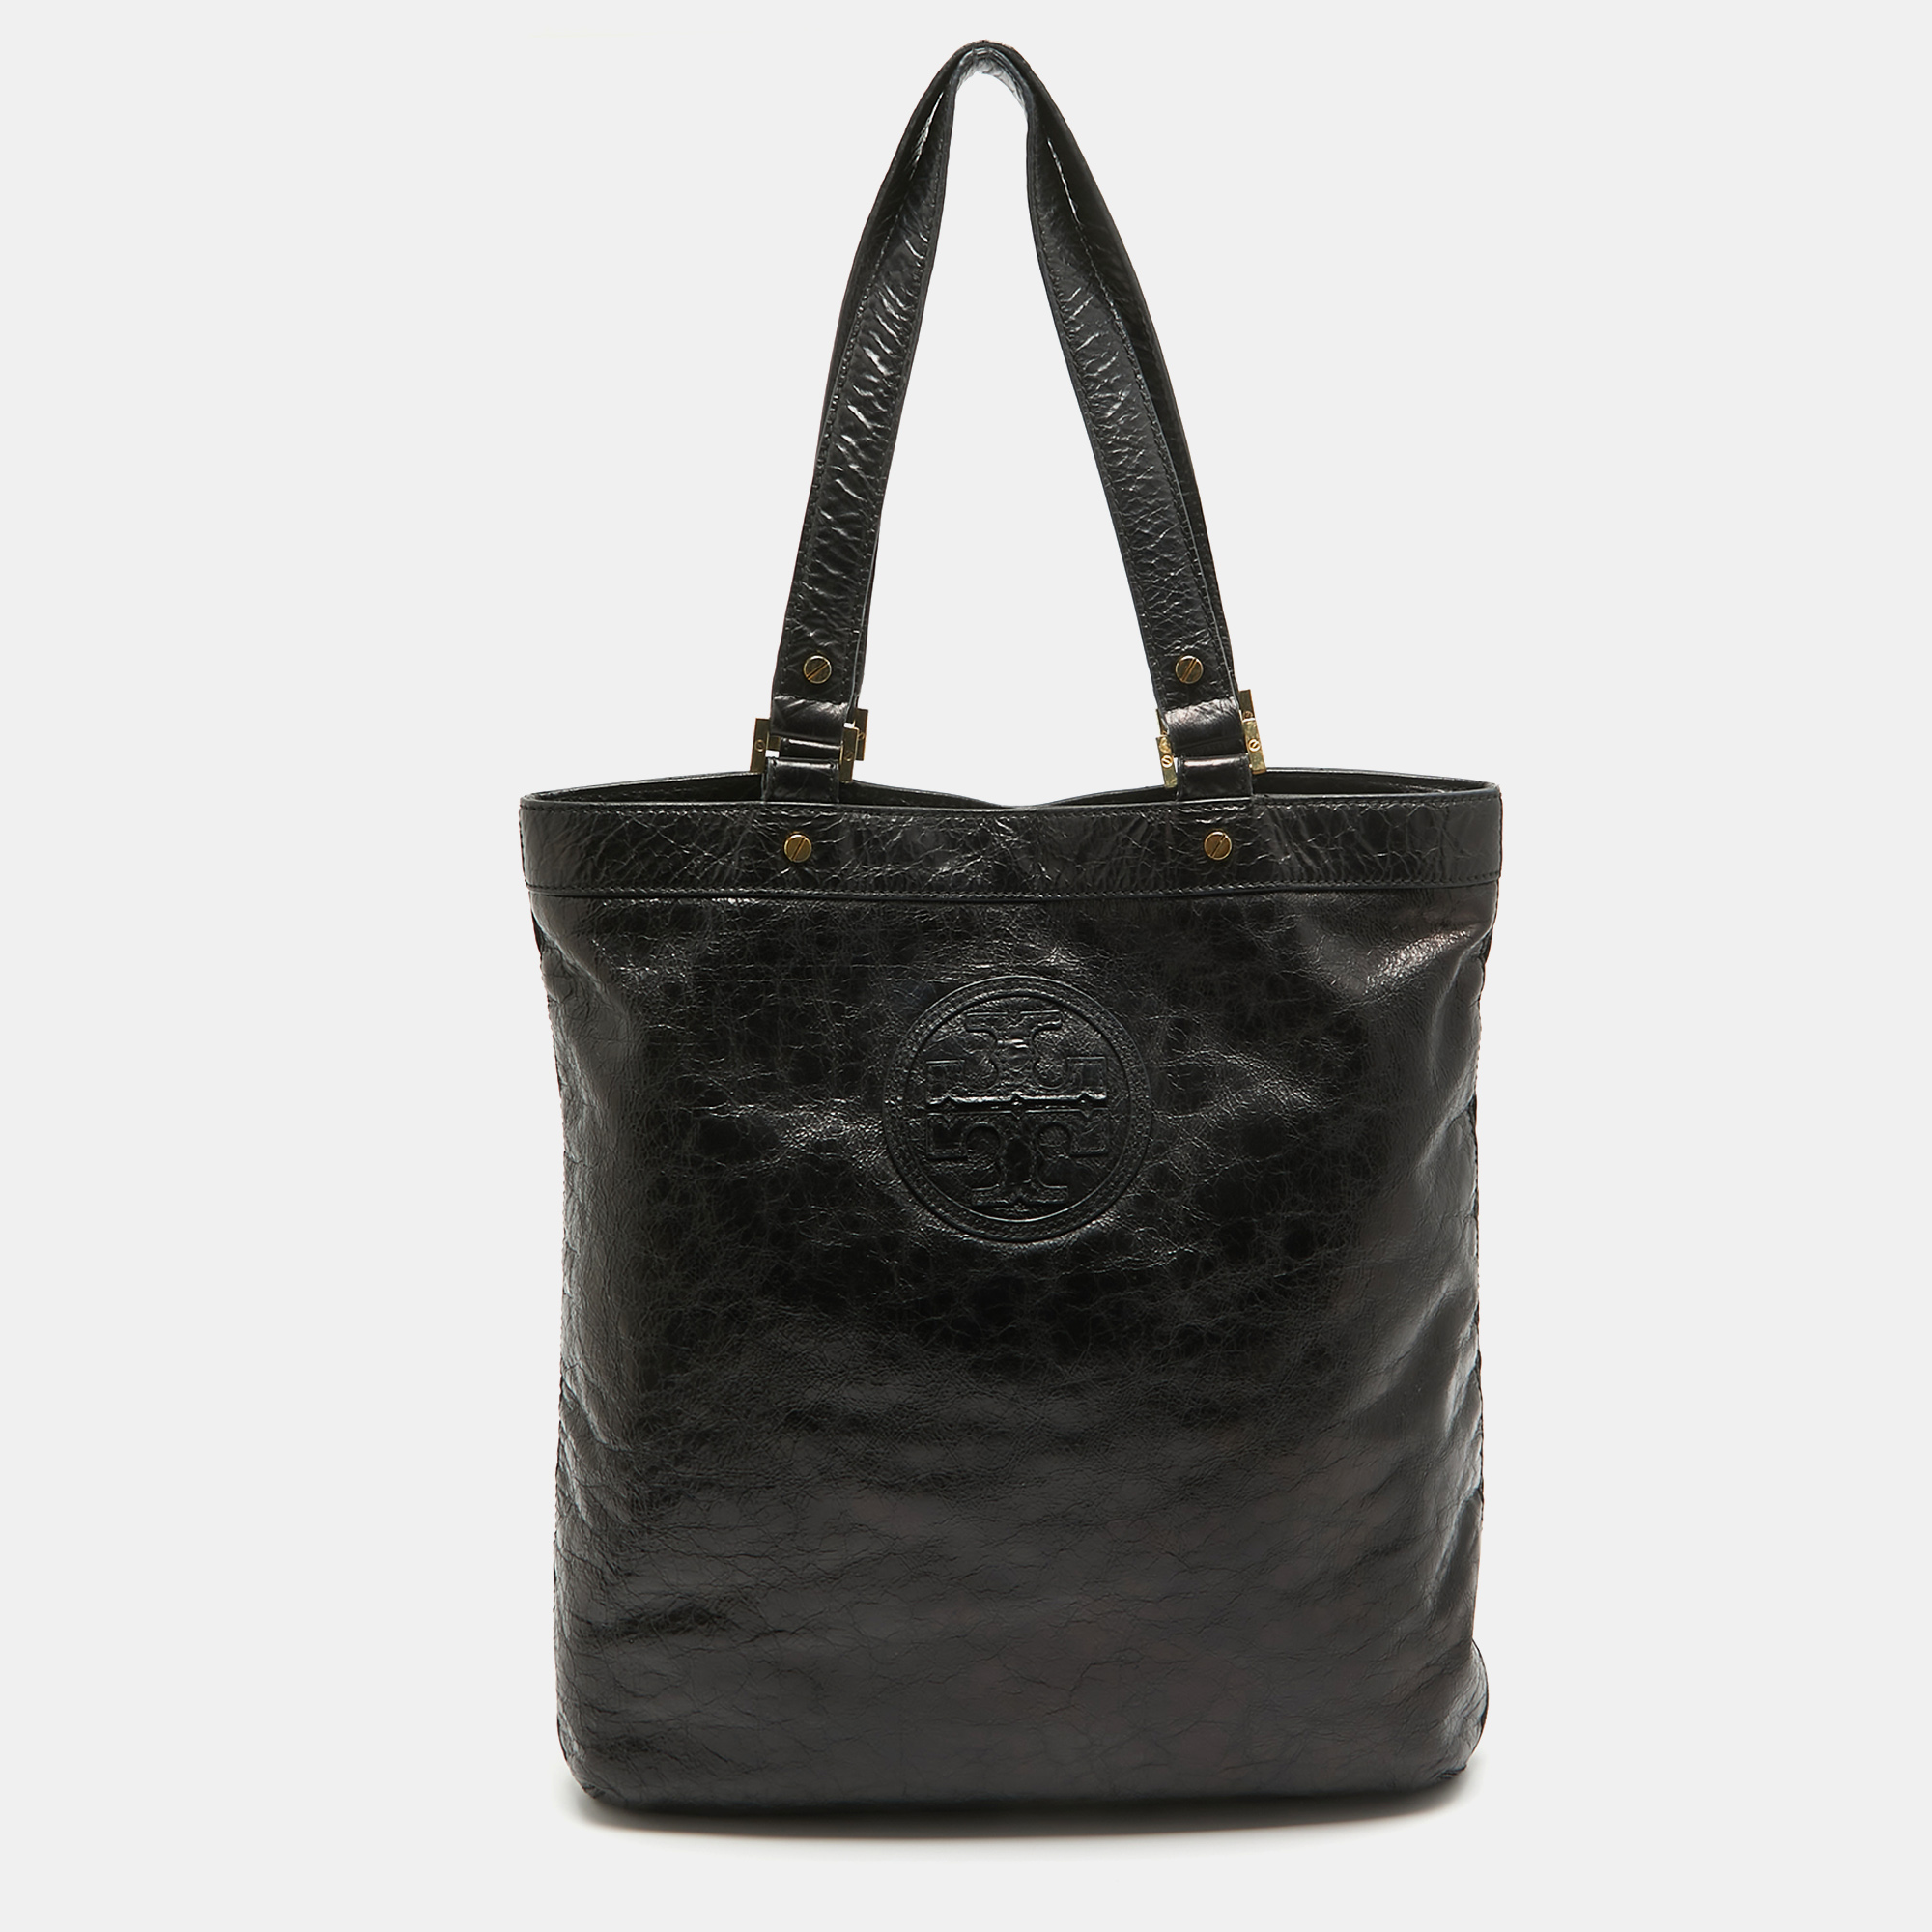 Tory burch black crinkled patent leather embossed tote